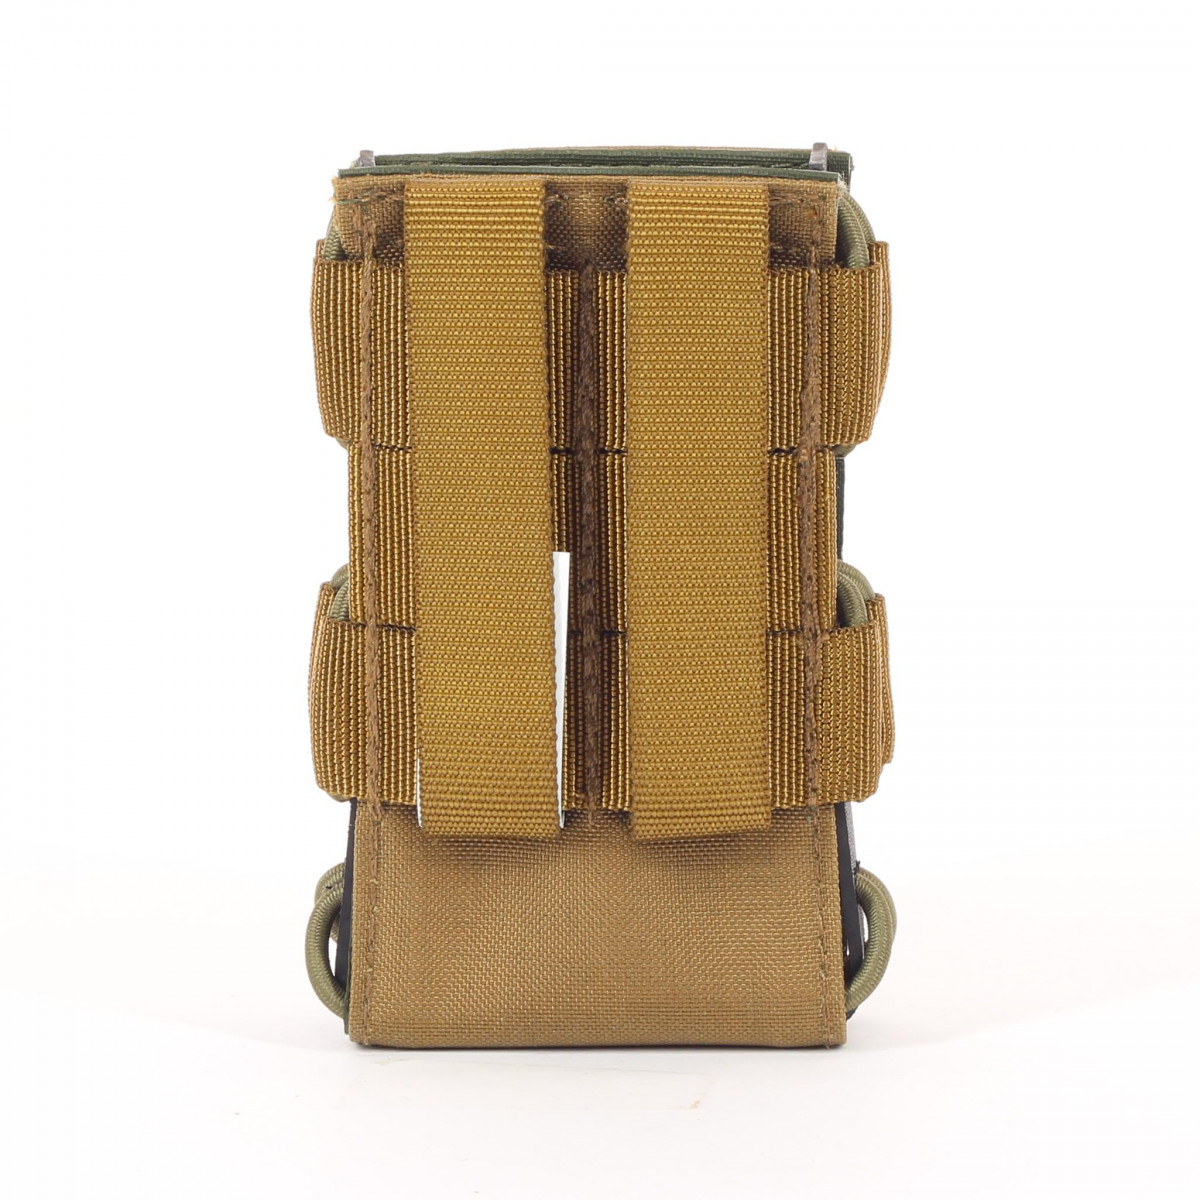 Quick-draw magazine pouch M4 in Coyote